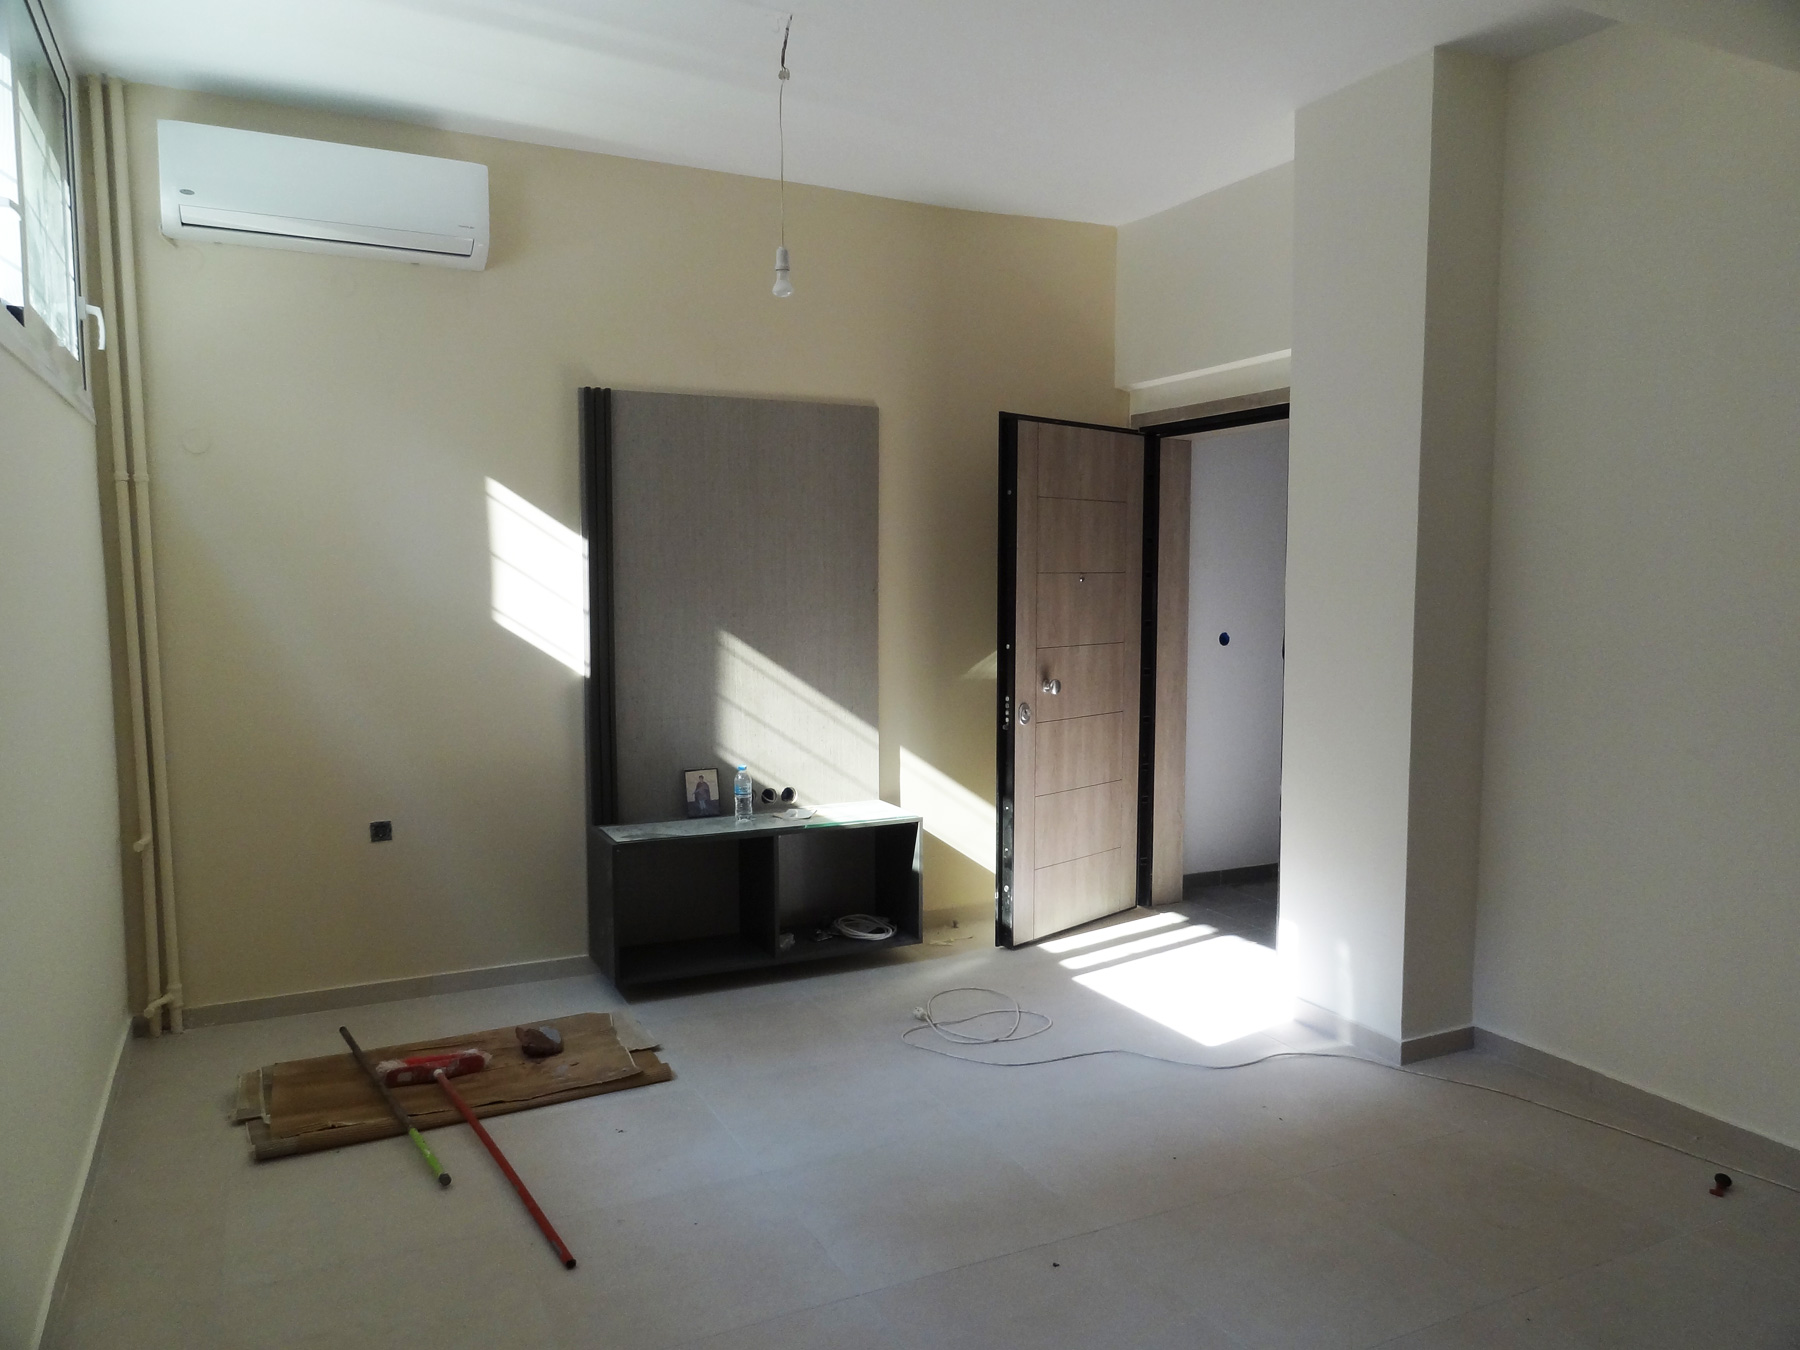 Fully renovated studio apartment for rent, of 42 sq.m. at the center of Ioannina